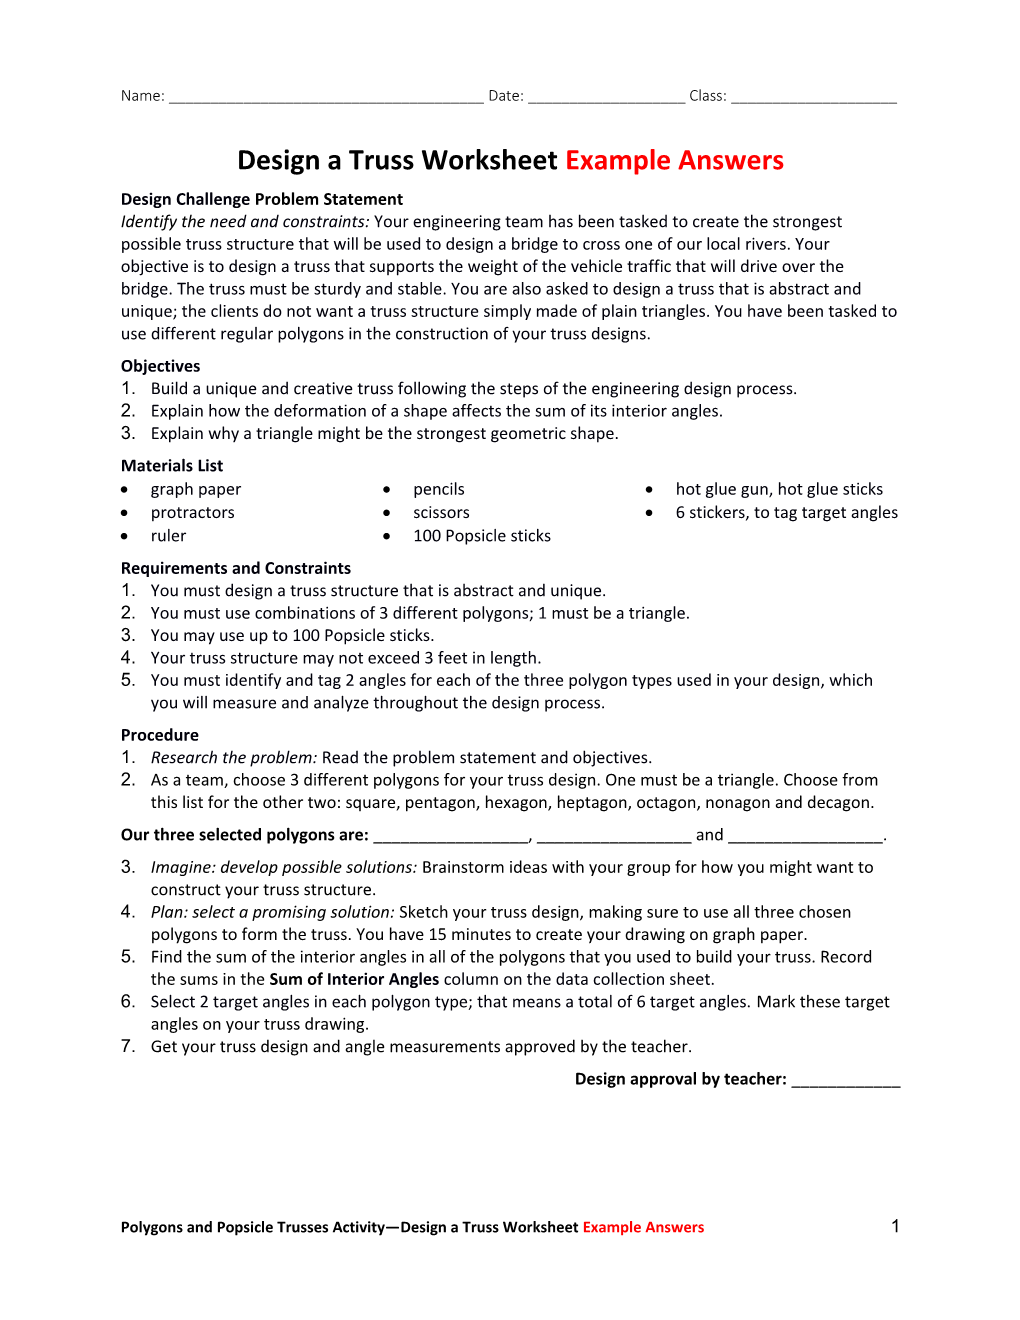 Design a Truss Worksheetexample Answers